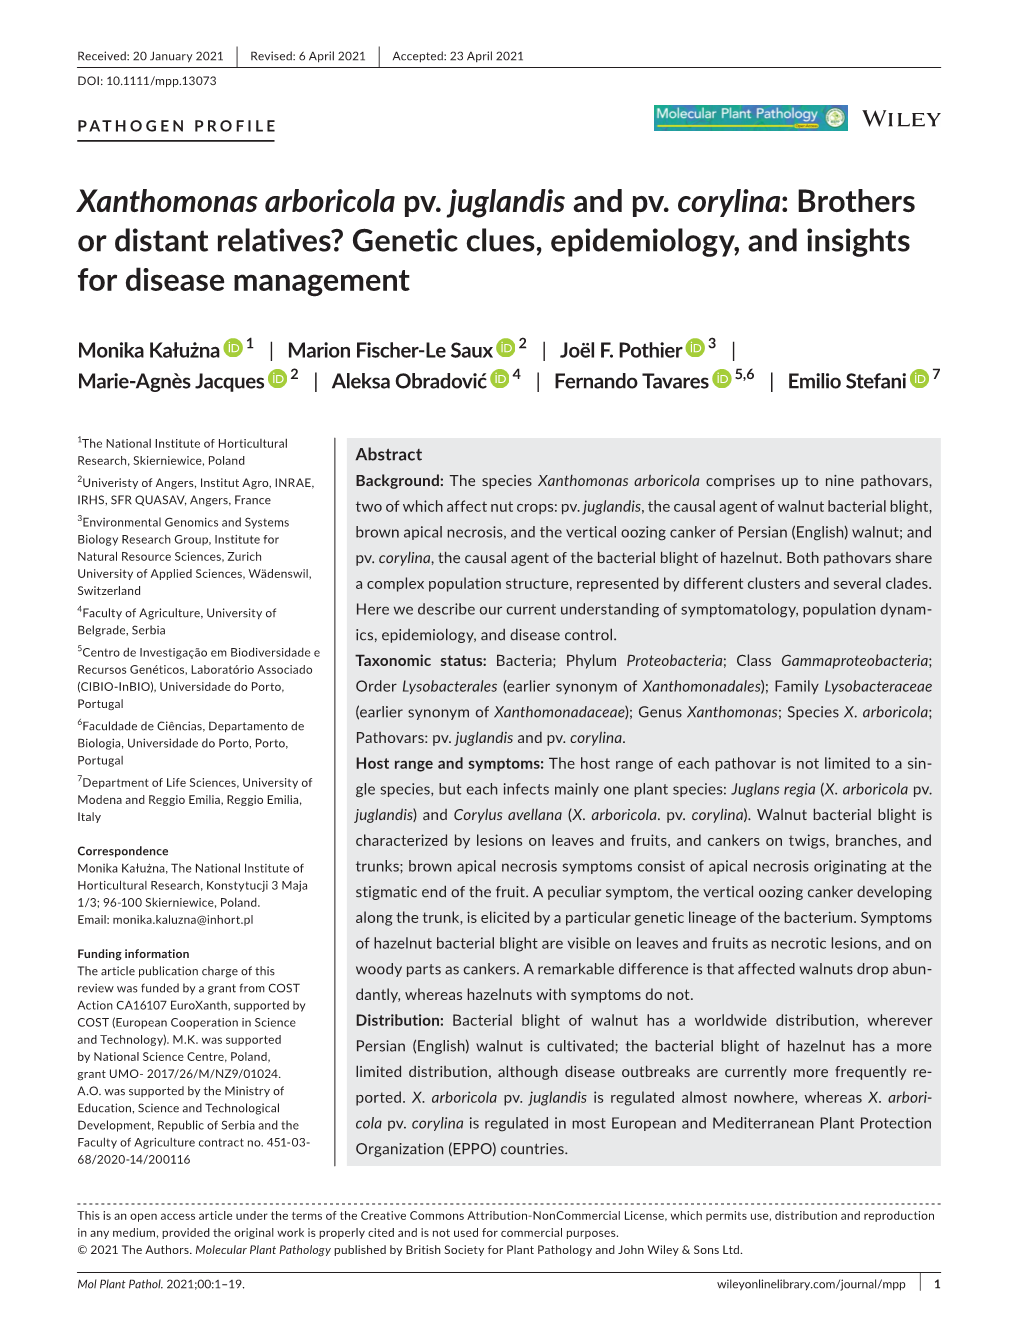 Xanthomonas Arboricola Pv. Juglandis and Pv. Corylina: Brothers Or Distant Relatives? Genetic Clues, Epidemiology, and Insights for Disease Management